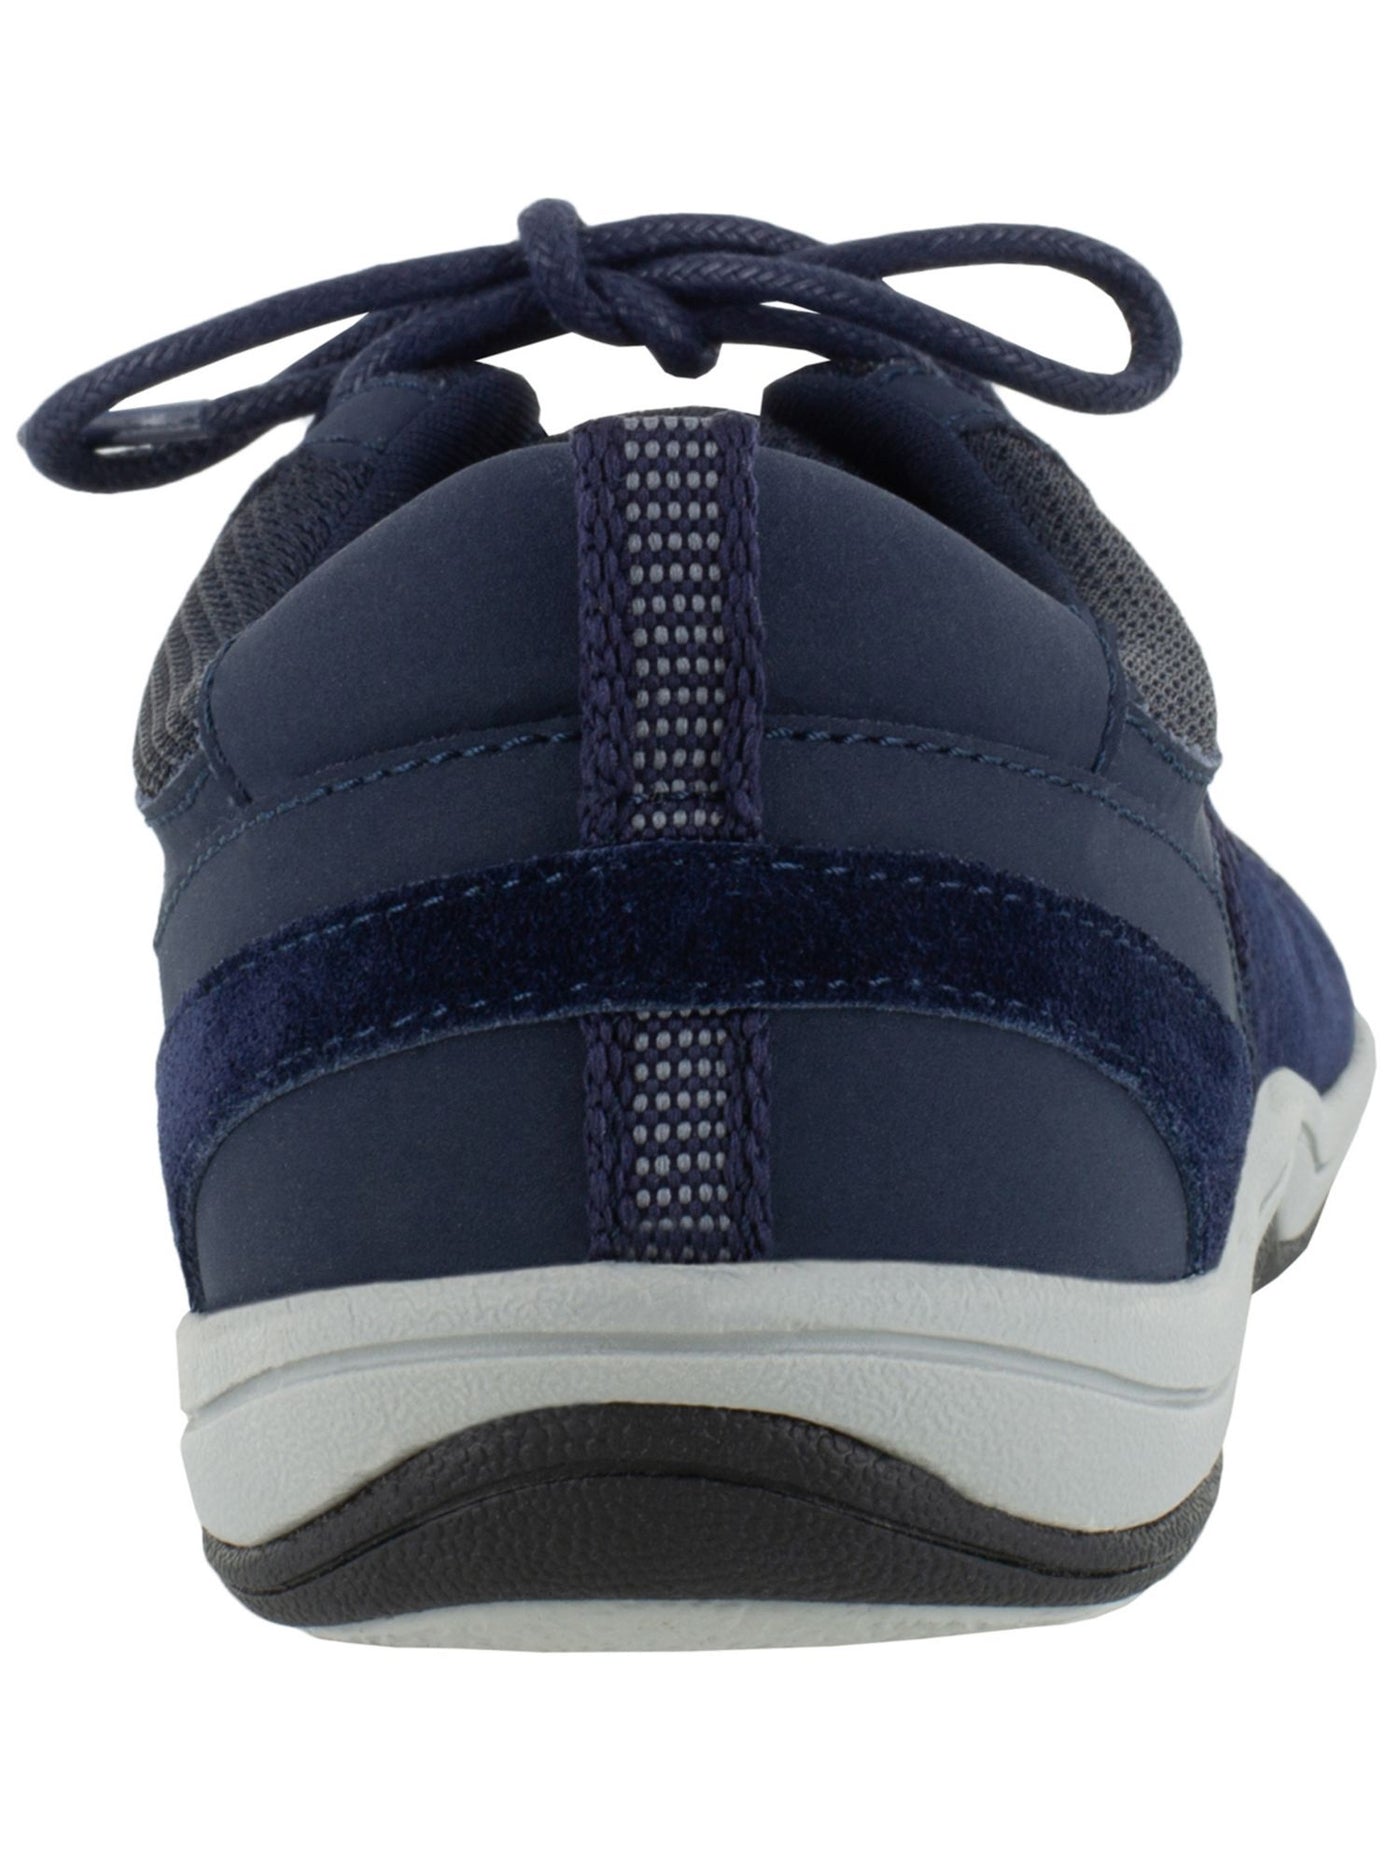 EASY STREET SPORT Womens Navy Back Pull Tab Removable Insole Comfort Merrimack Round Toe Wedge Lace-Up Leather Athletic Sneakers Shoes 7 W